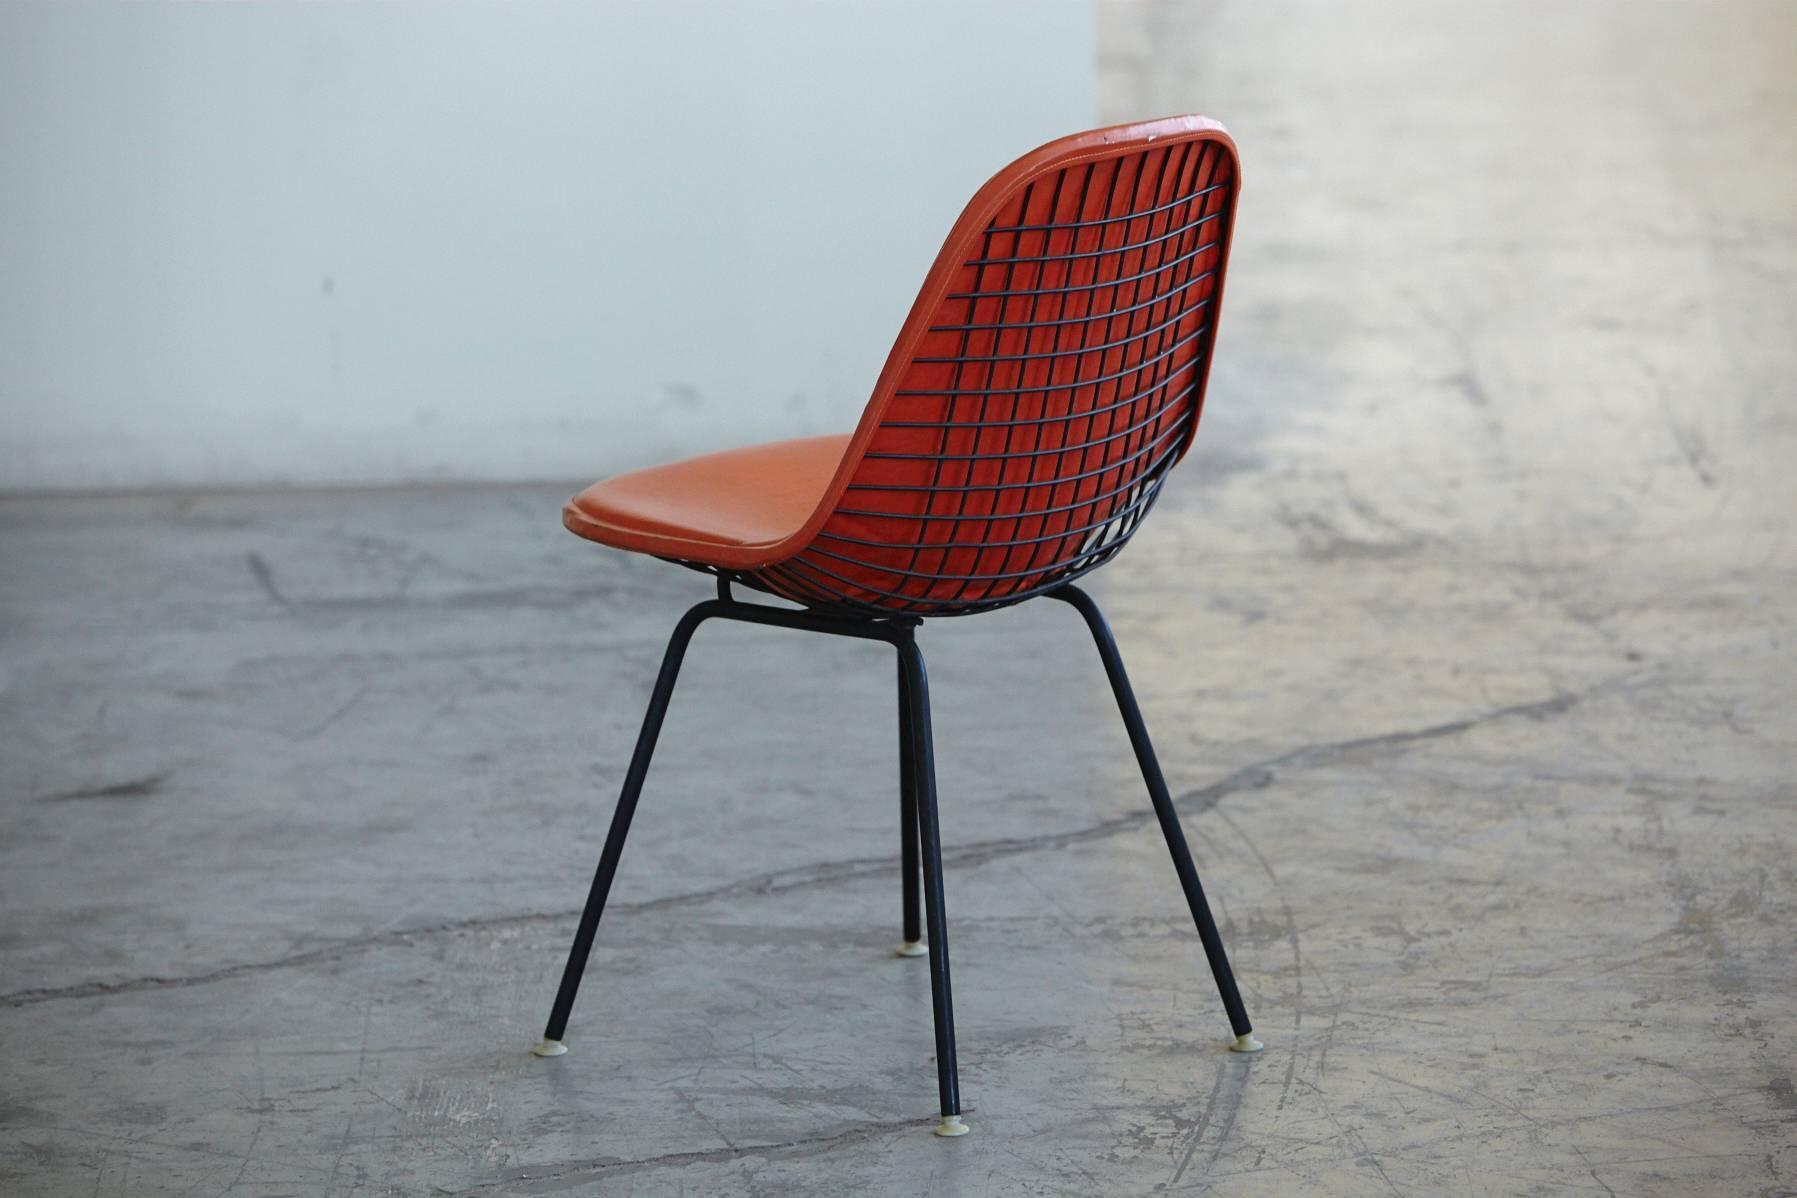 Mid-20th Century Original Eames DKX-1 Side Chair in Orange Leather for Herman Miller, 1960s For Sale